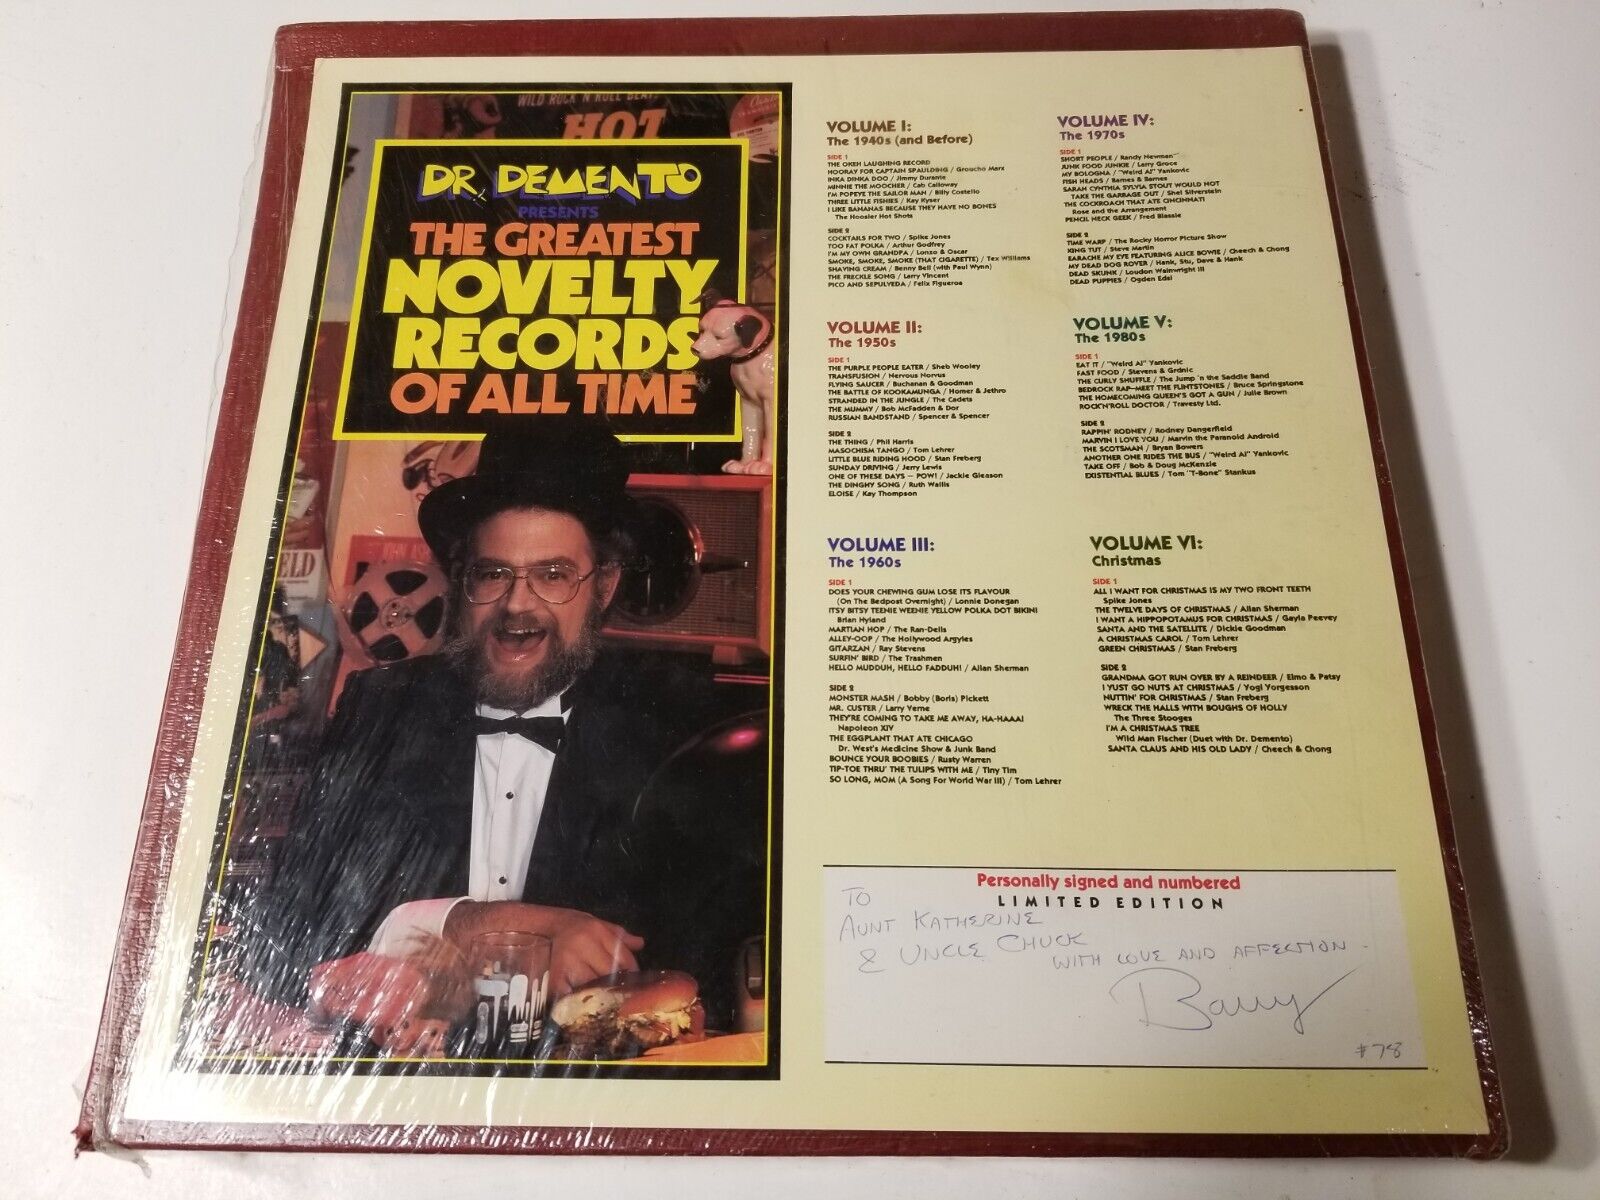 Vintage Dr. Demento’s The Greatest Novelty Records of All Time:Signed Barry, #78